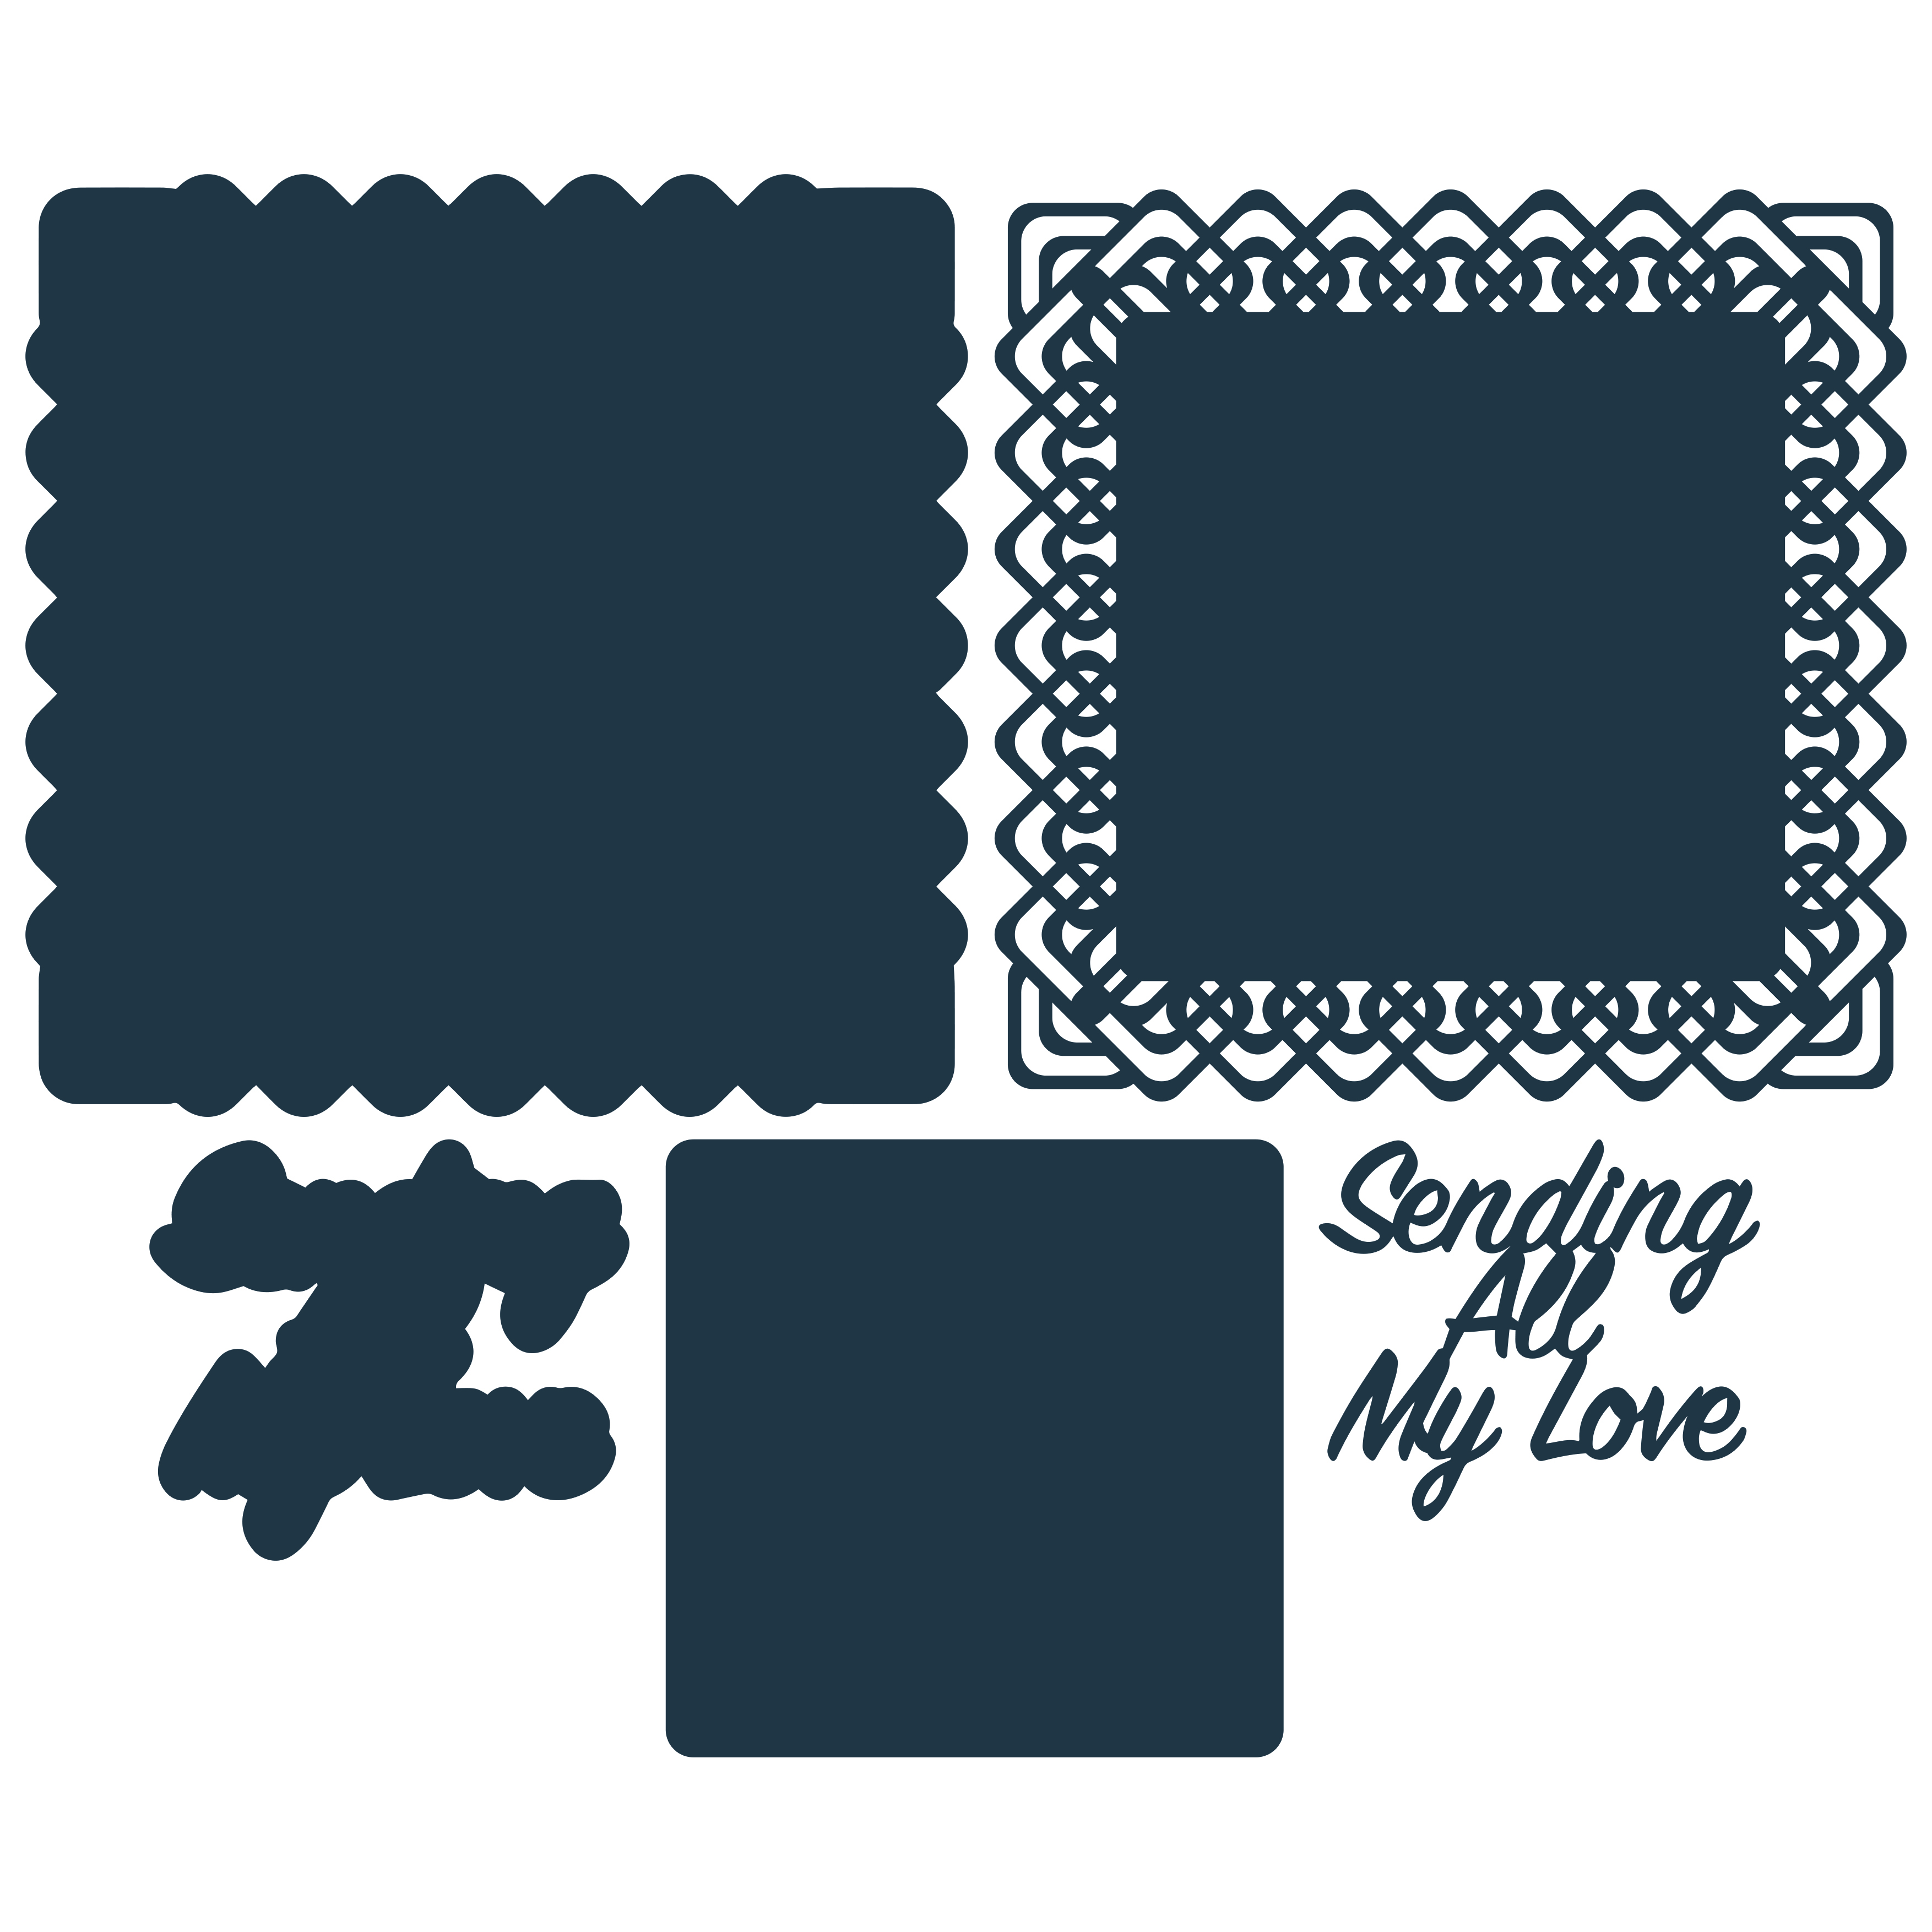 The Paper Boutique - Sending All My Love Cutting Die